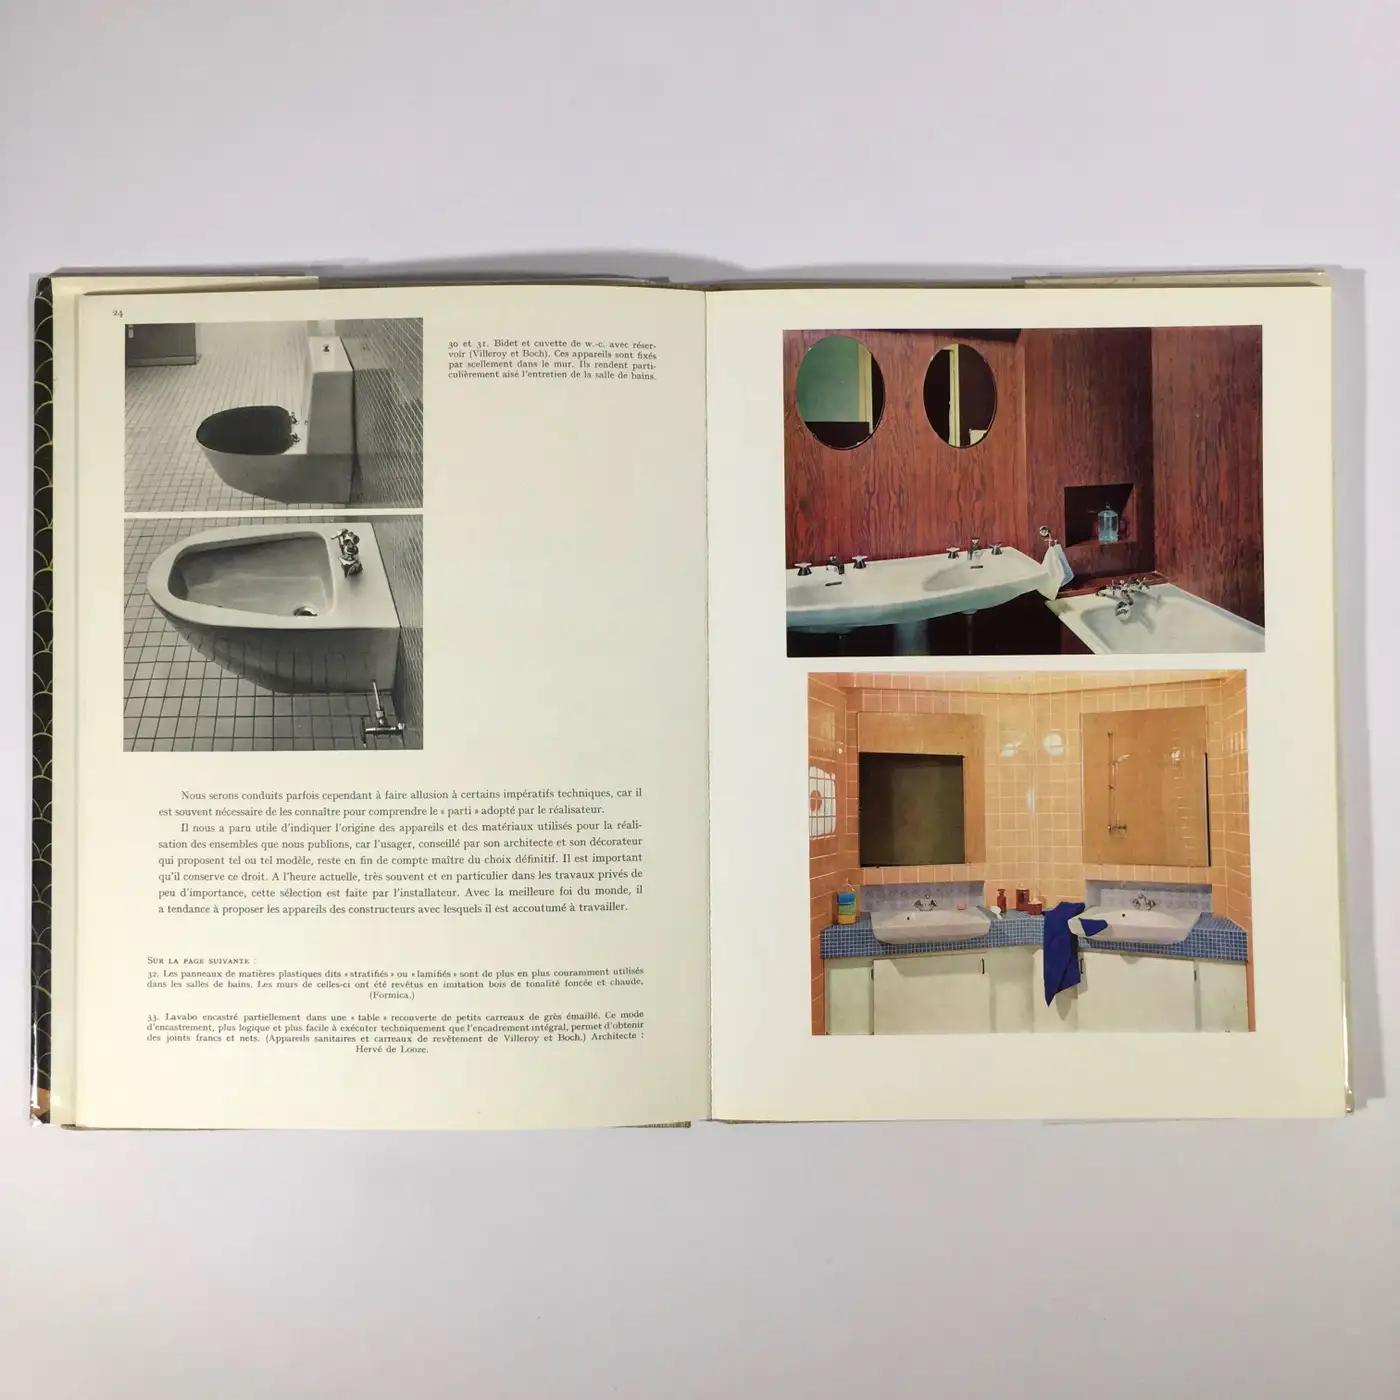 First edition 1965 Salles des Bains et Salles D'Eau by Herve de Looze.

A truly amazing book of historical importance but also amazing for bathroom ideas.

Dimensions: 28 x 22 x 2 cm

Condition: Very Good